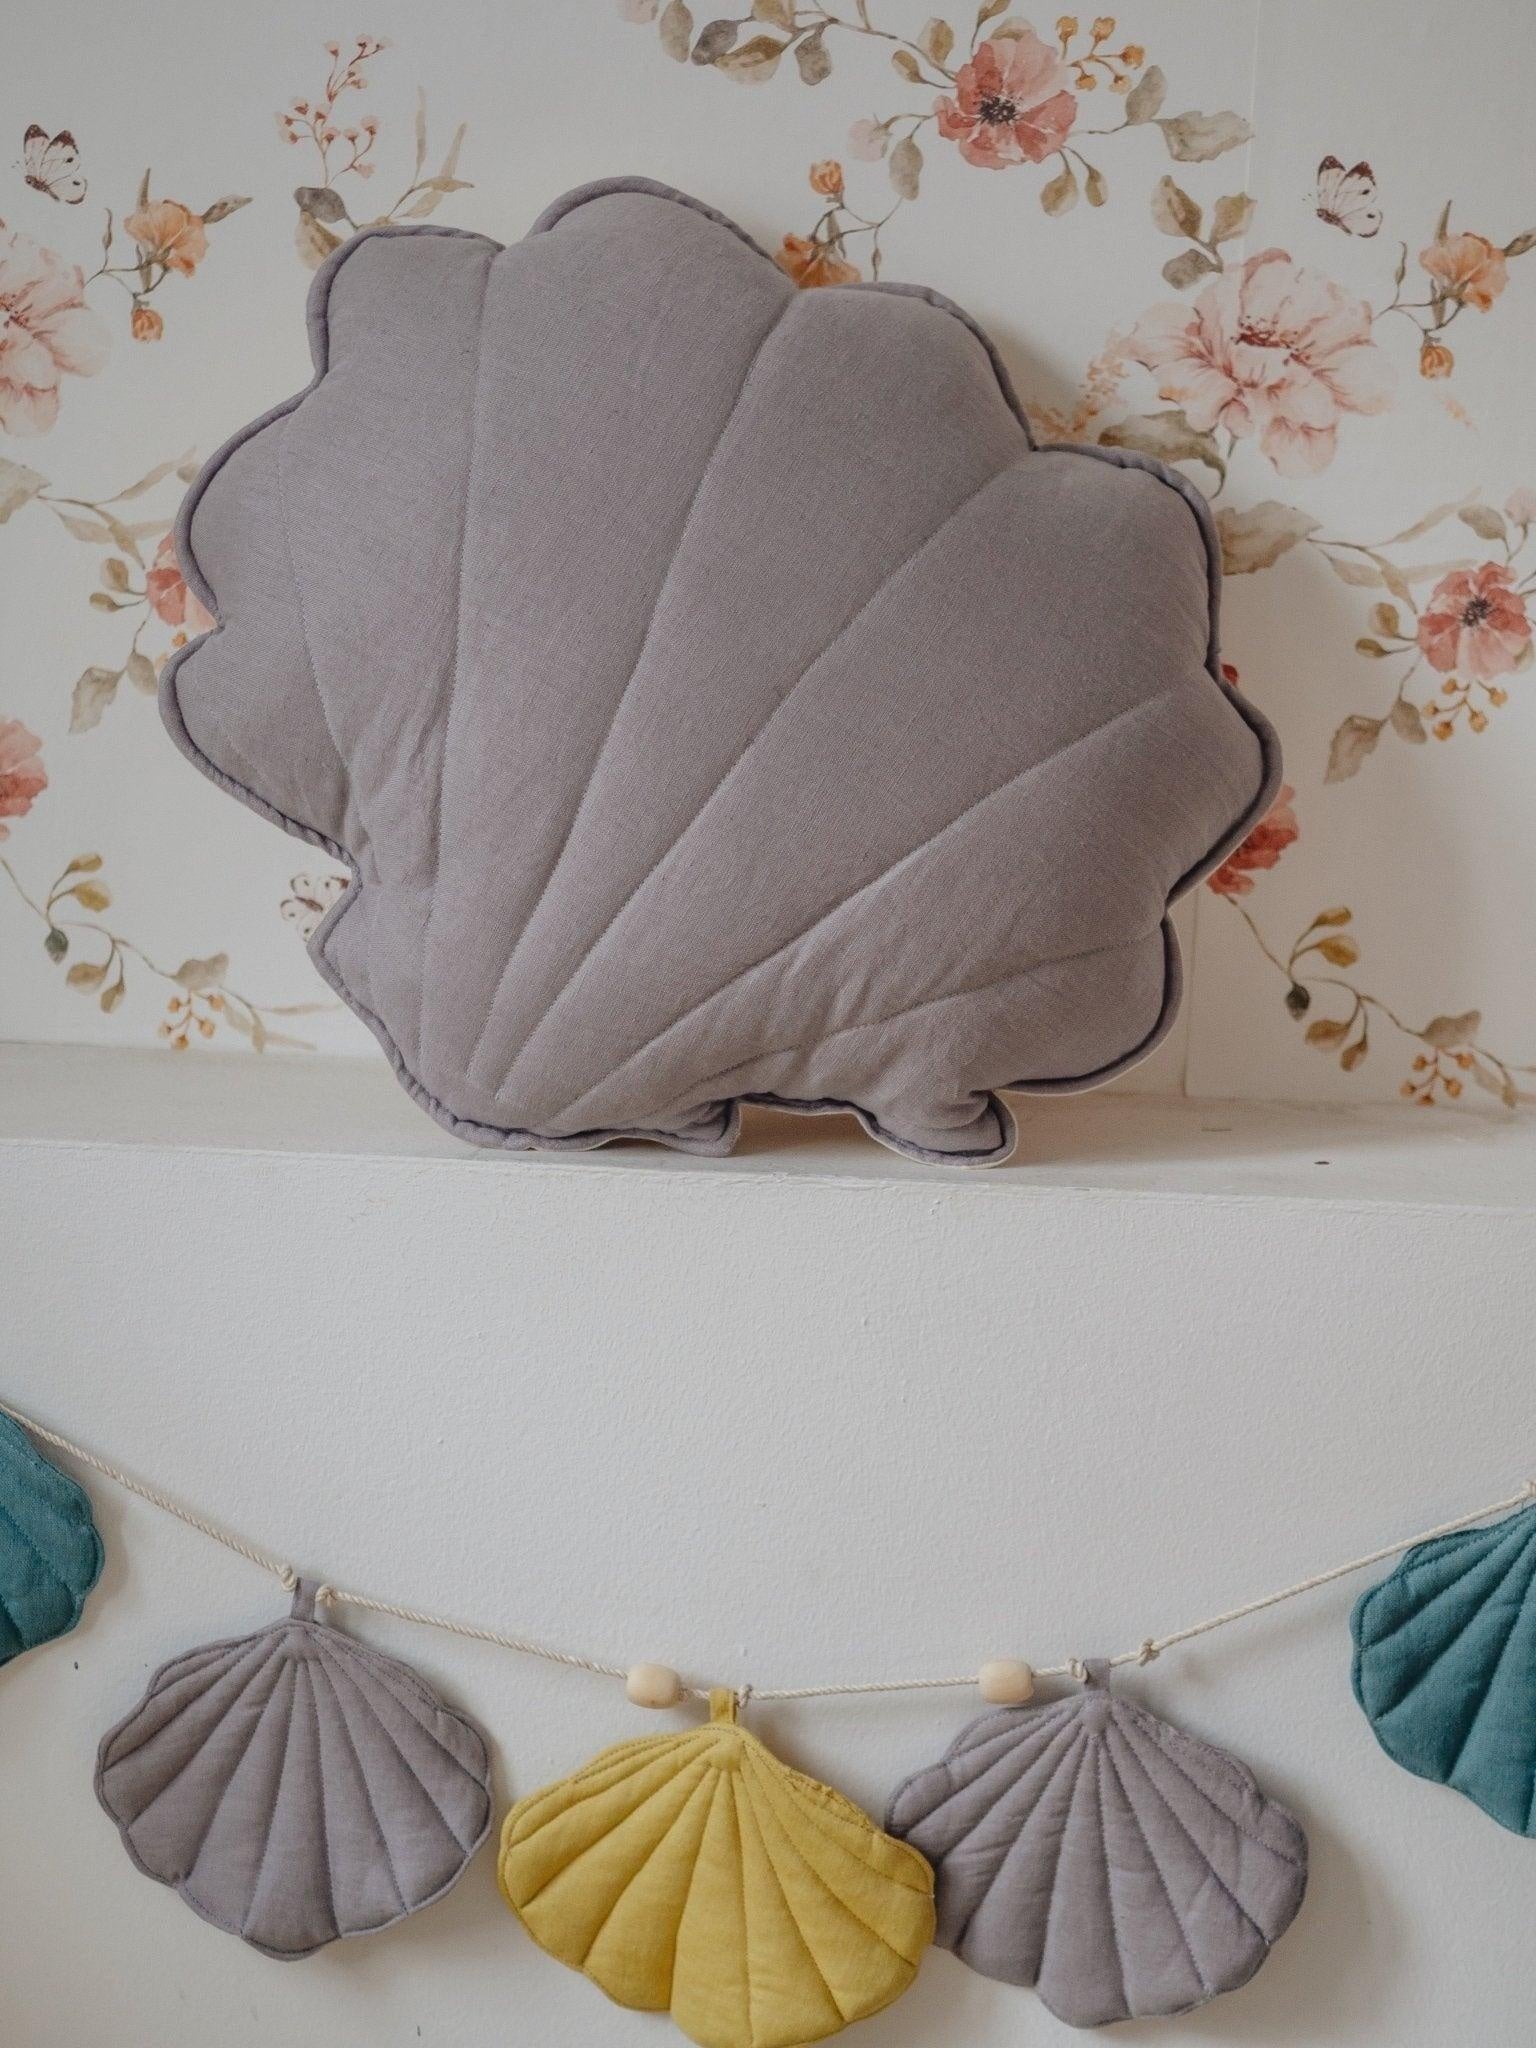 “Eye of the Sea” Linen Garland with Shells